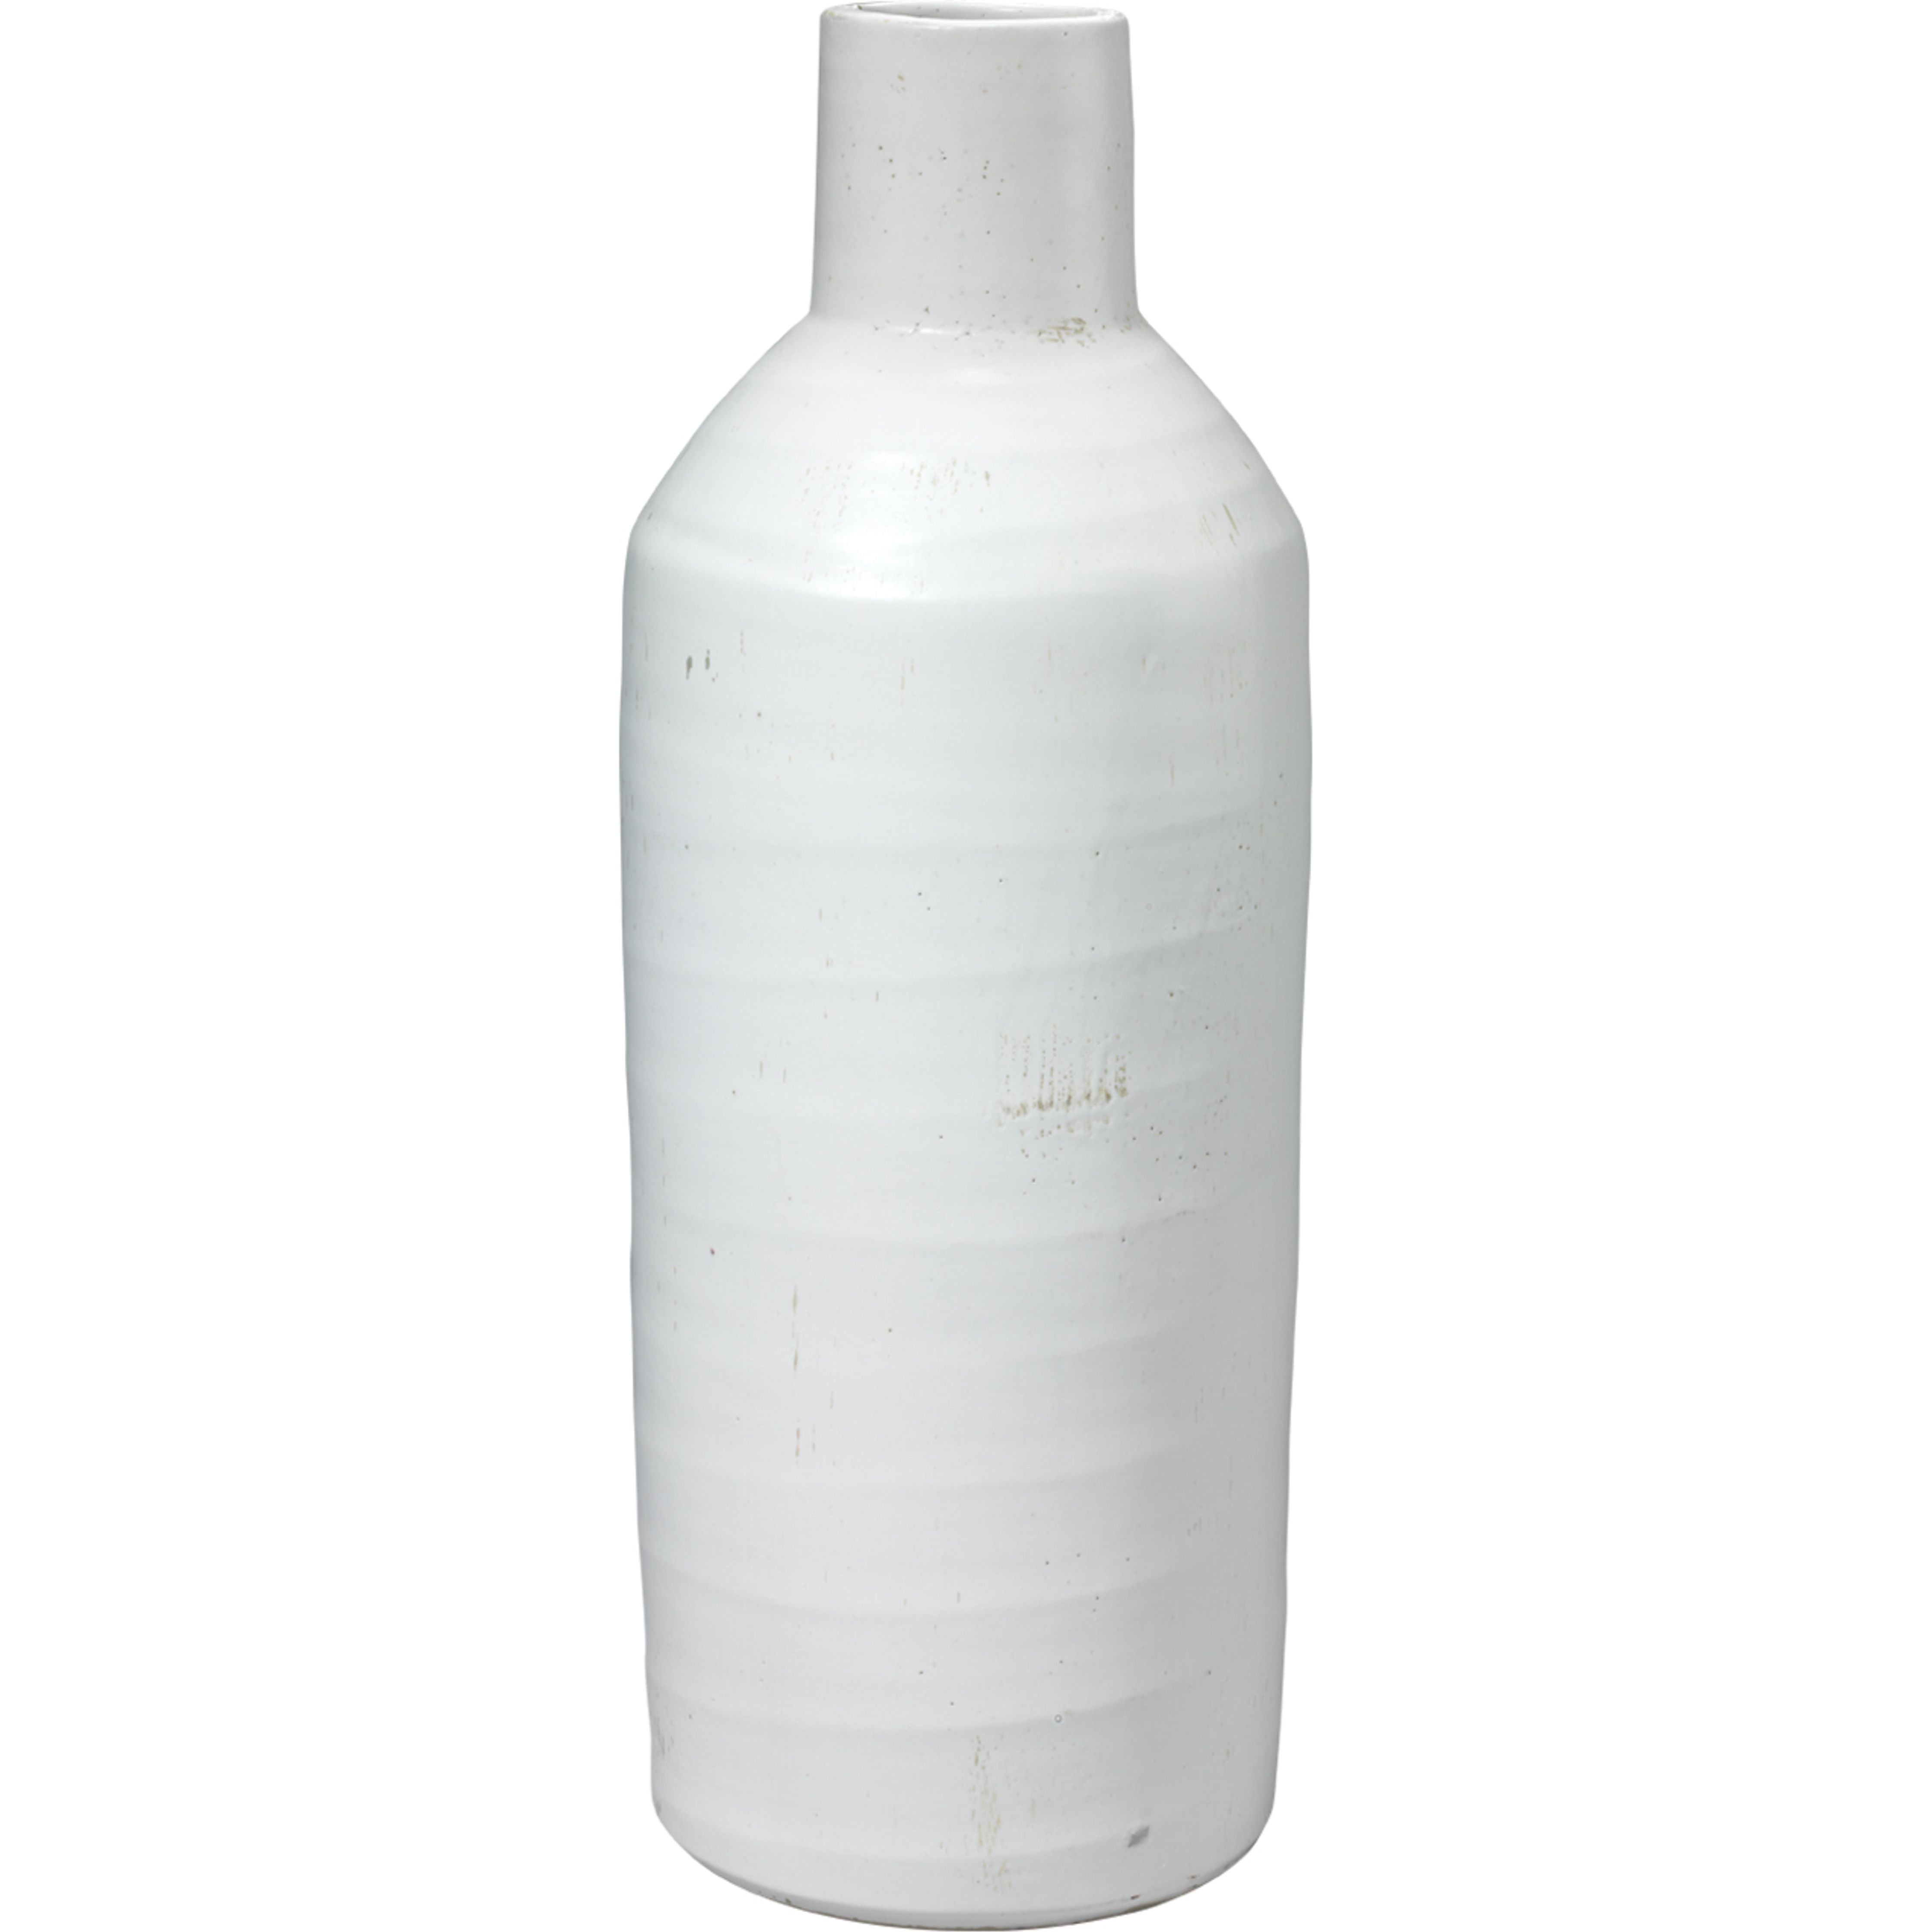 Jamie Young Company - 7DIMP-CAWH - Dimple Carafe - Dimple - White